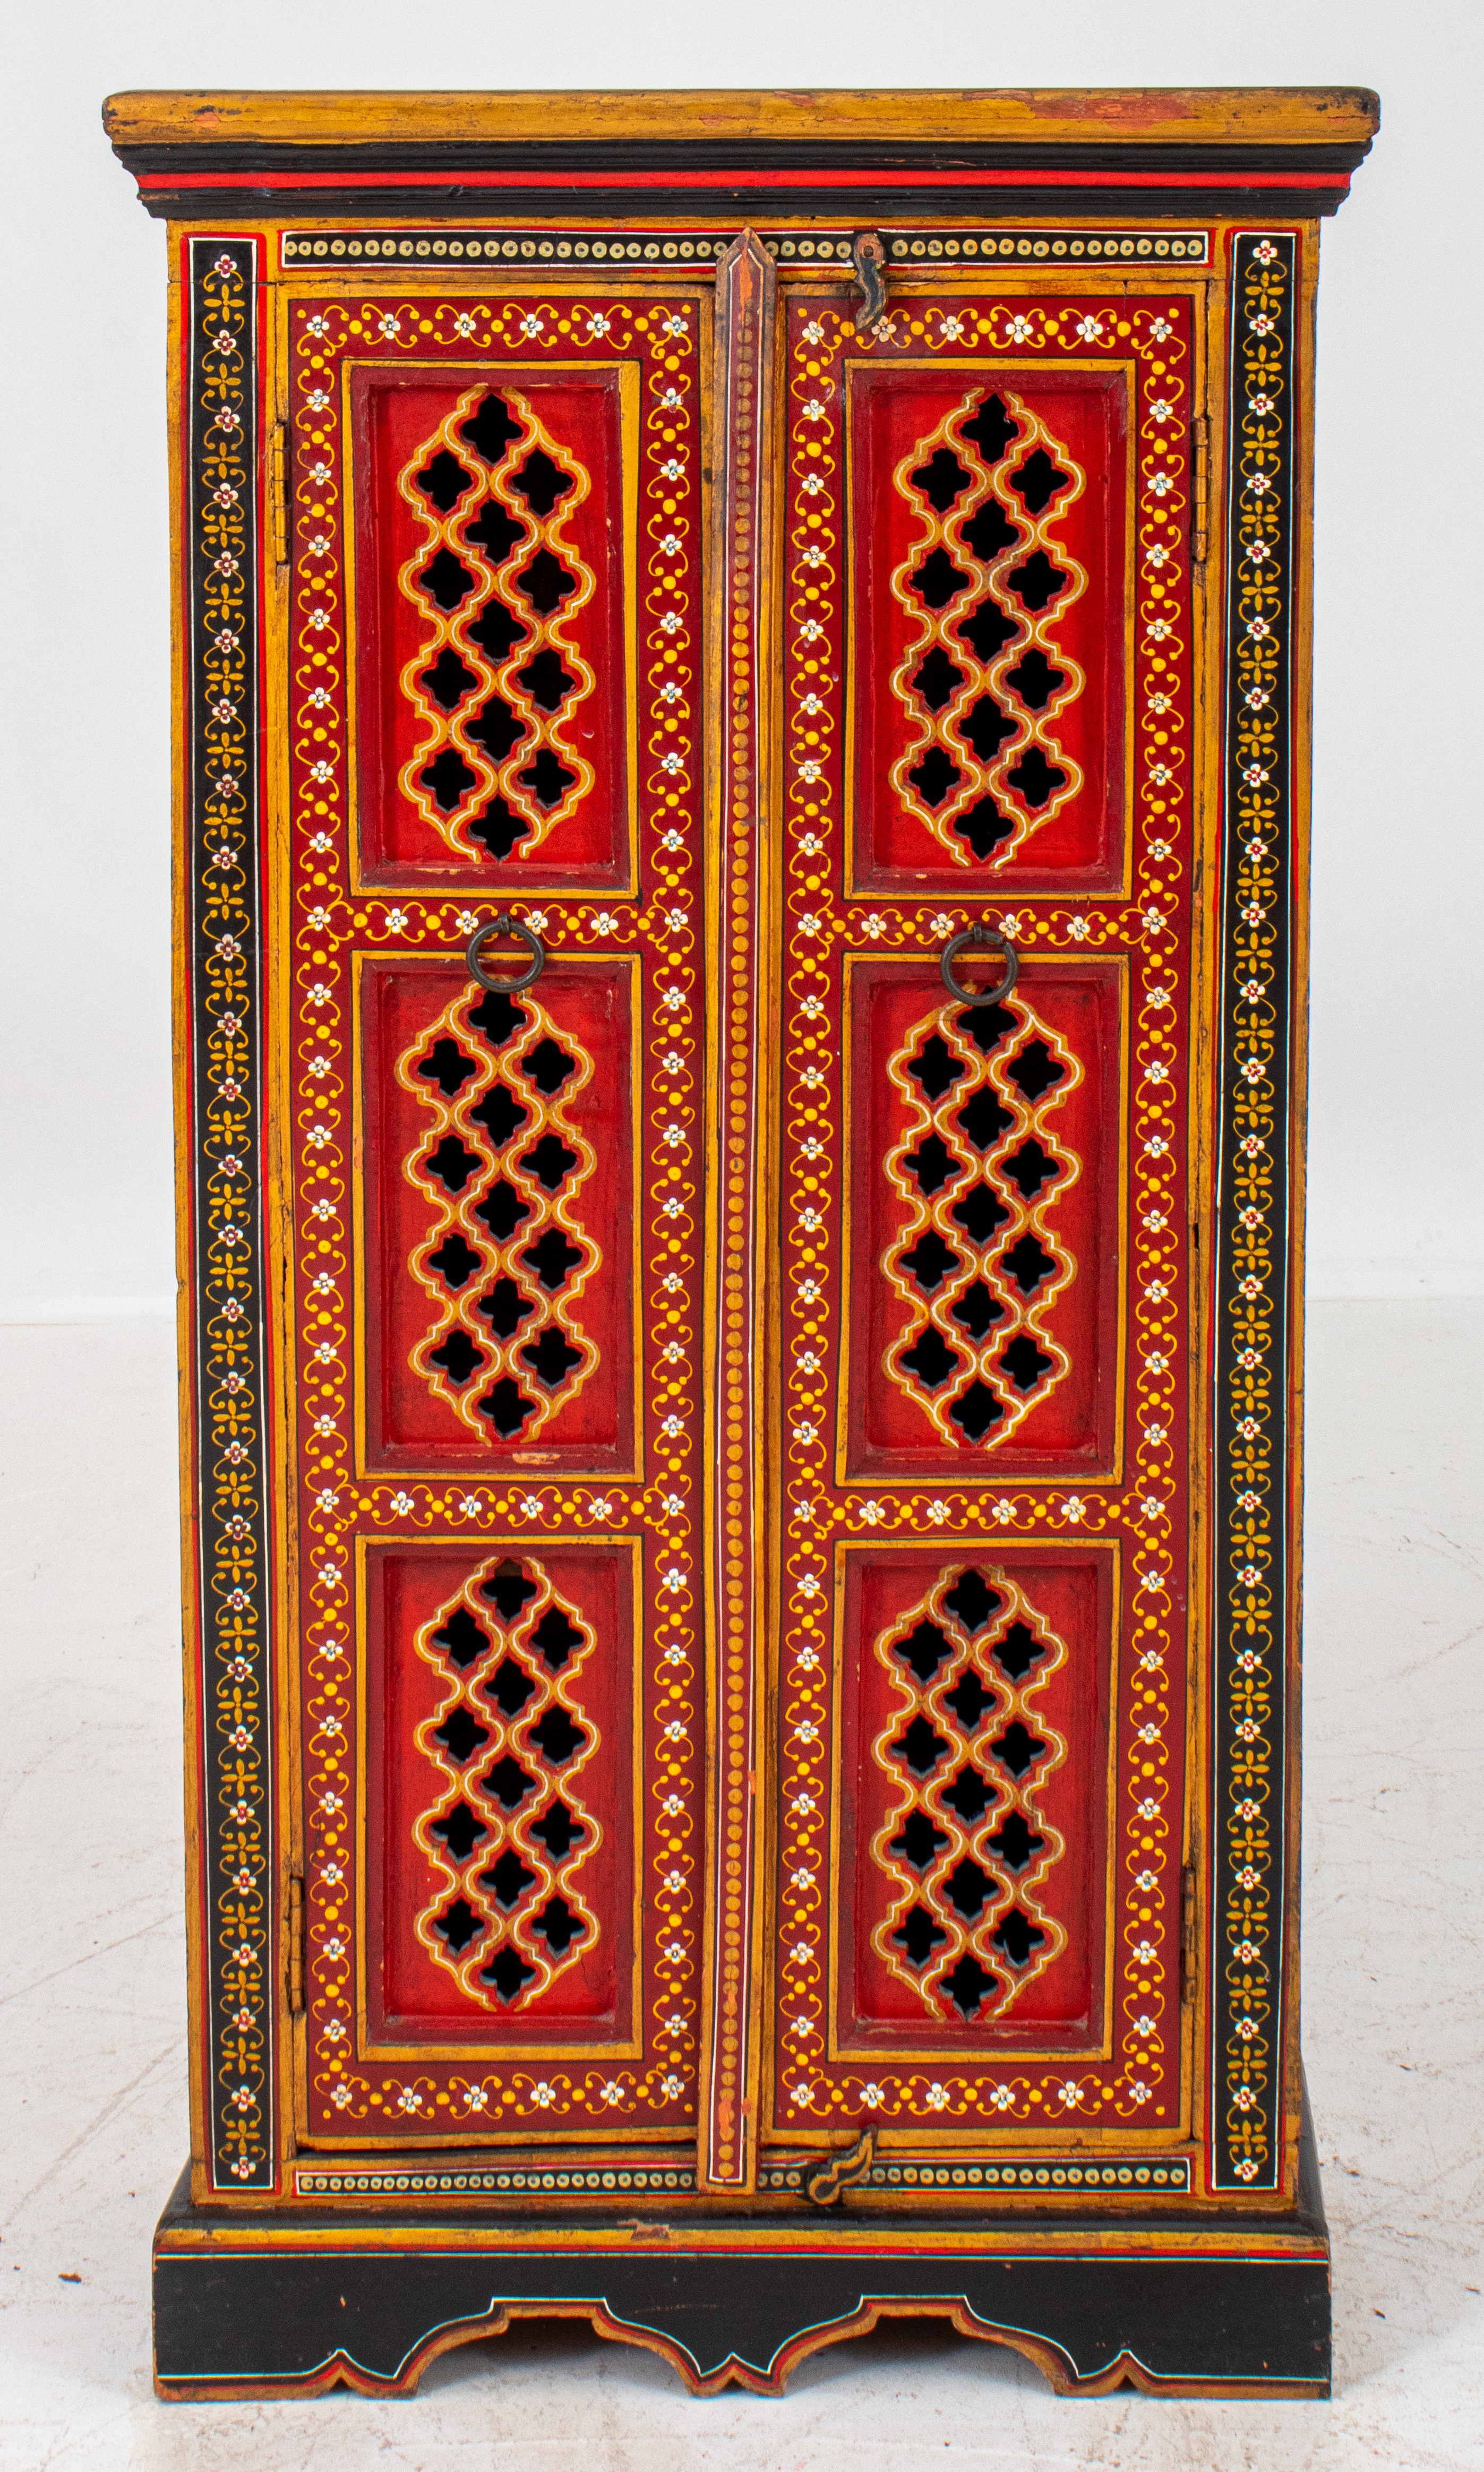 INDIAN HAND PAINTED WOODEN CABINET